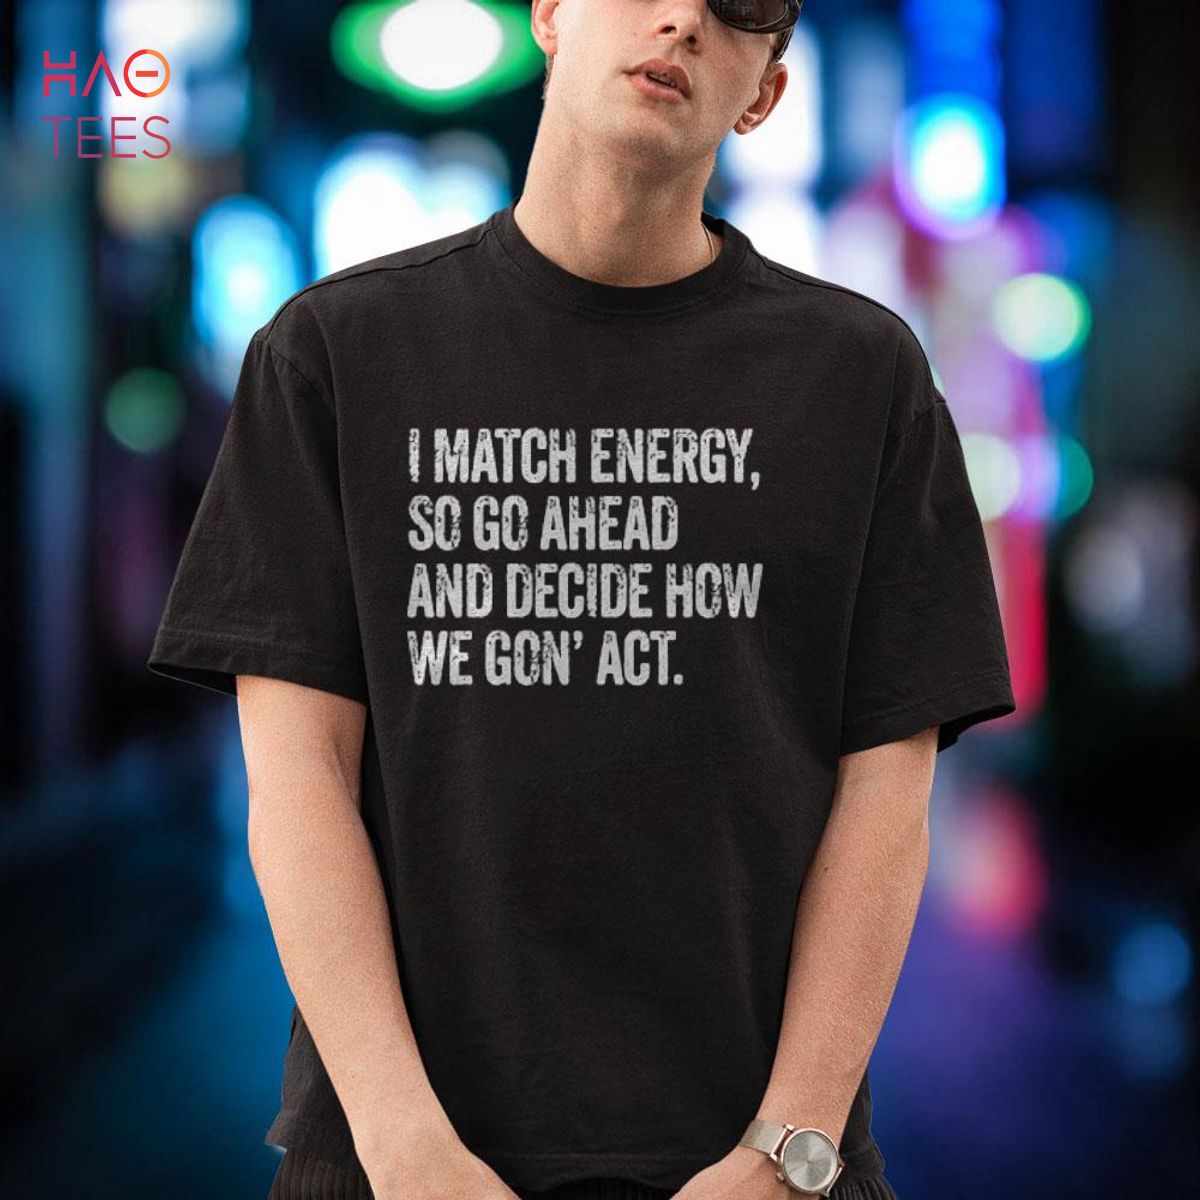 I Match Energy So Go Ahead And Decide How We Gon’ Act Shirt